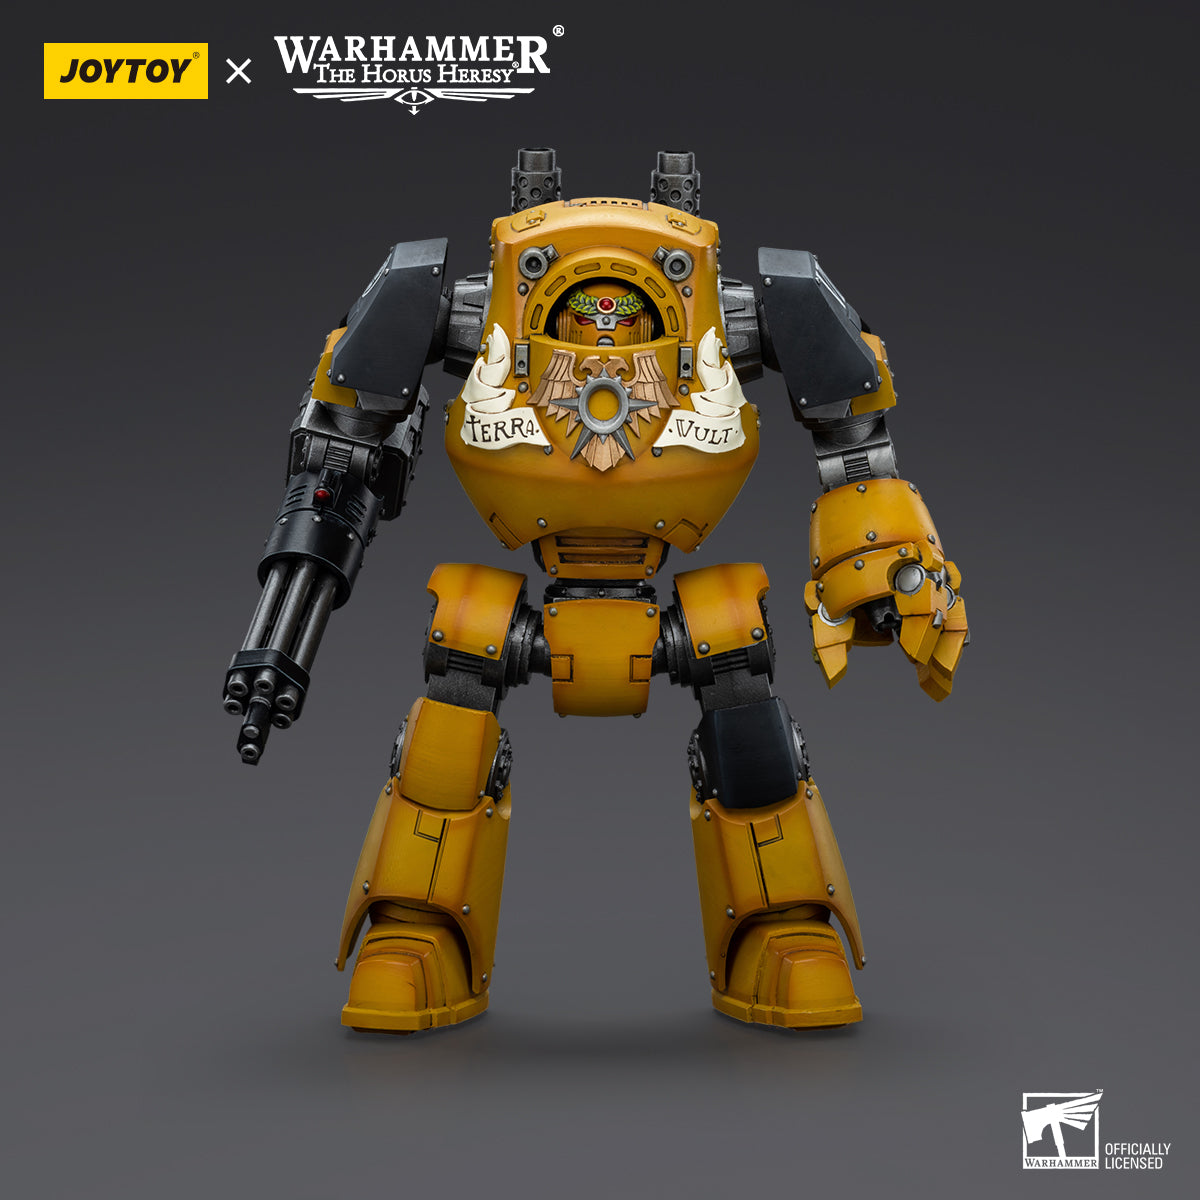 Warhammer Collectibles: 1/18 Imperial Fists Contemptor Dreadnought